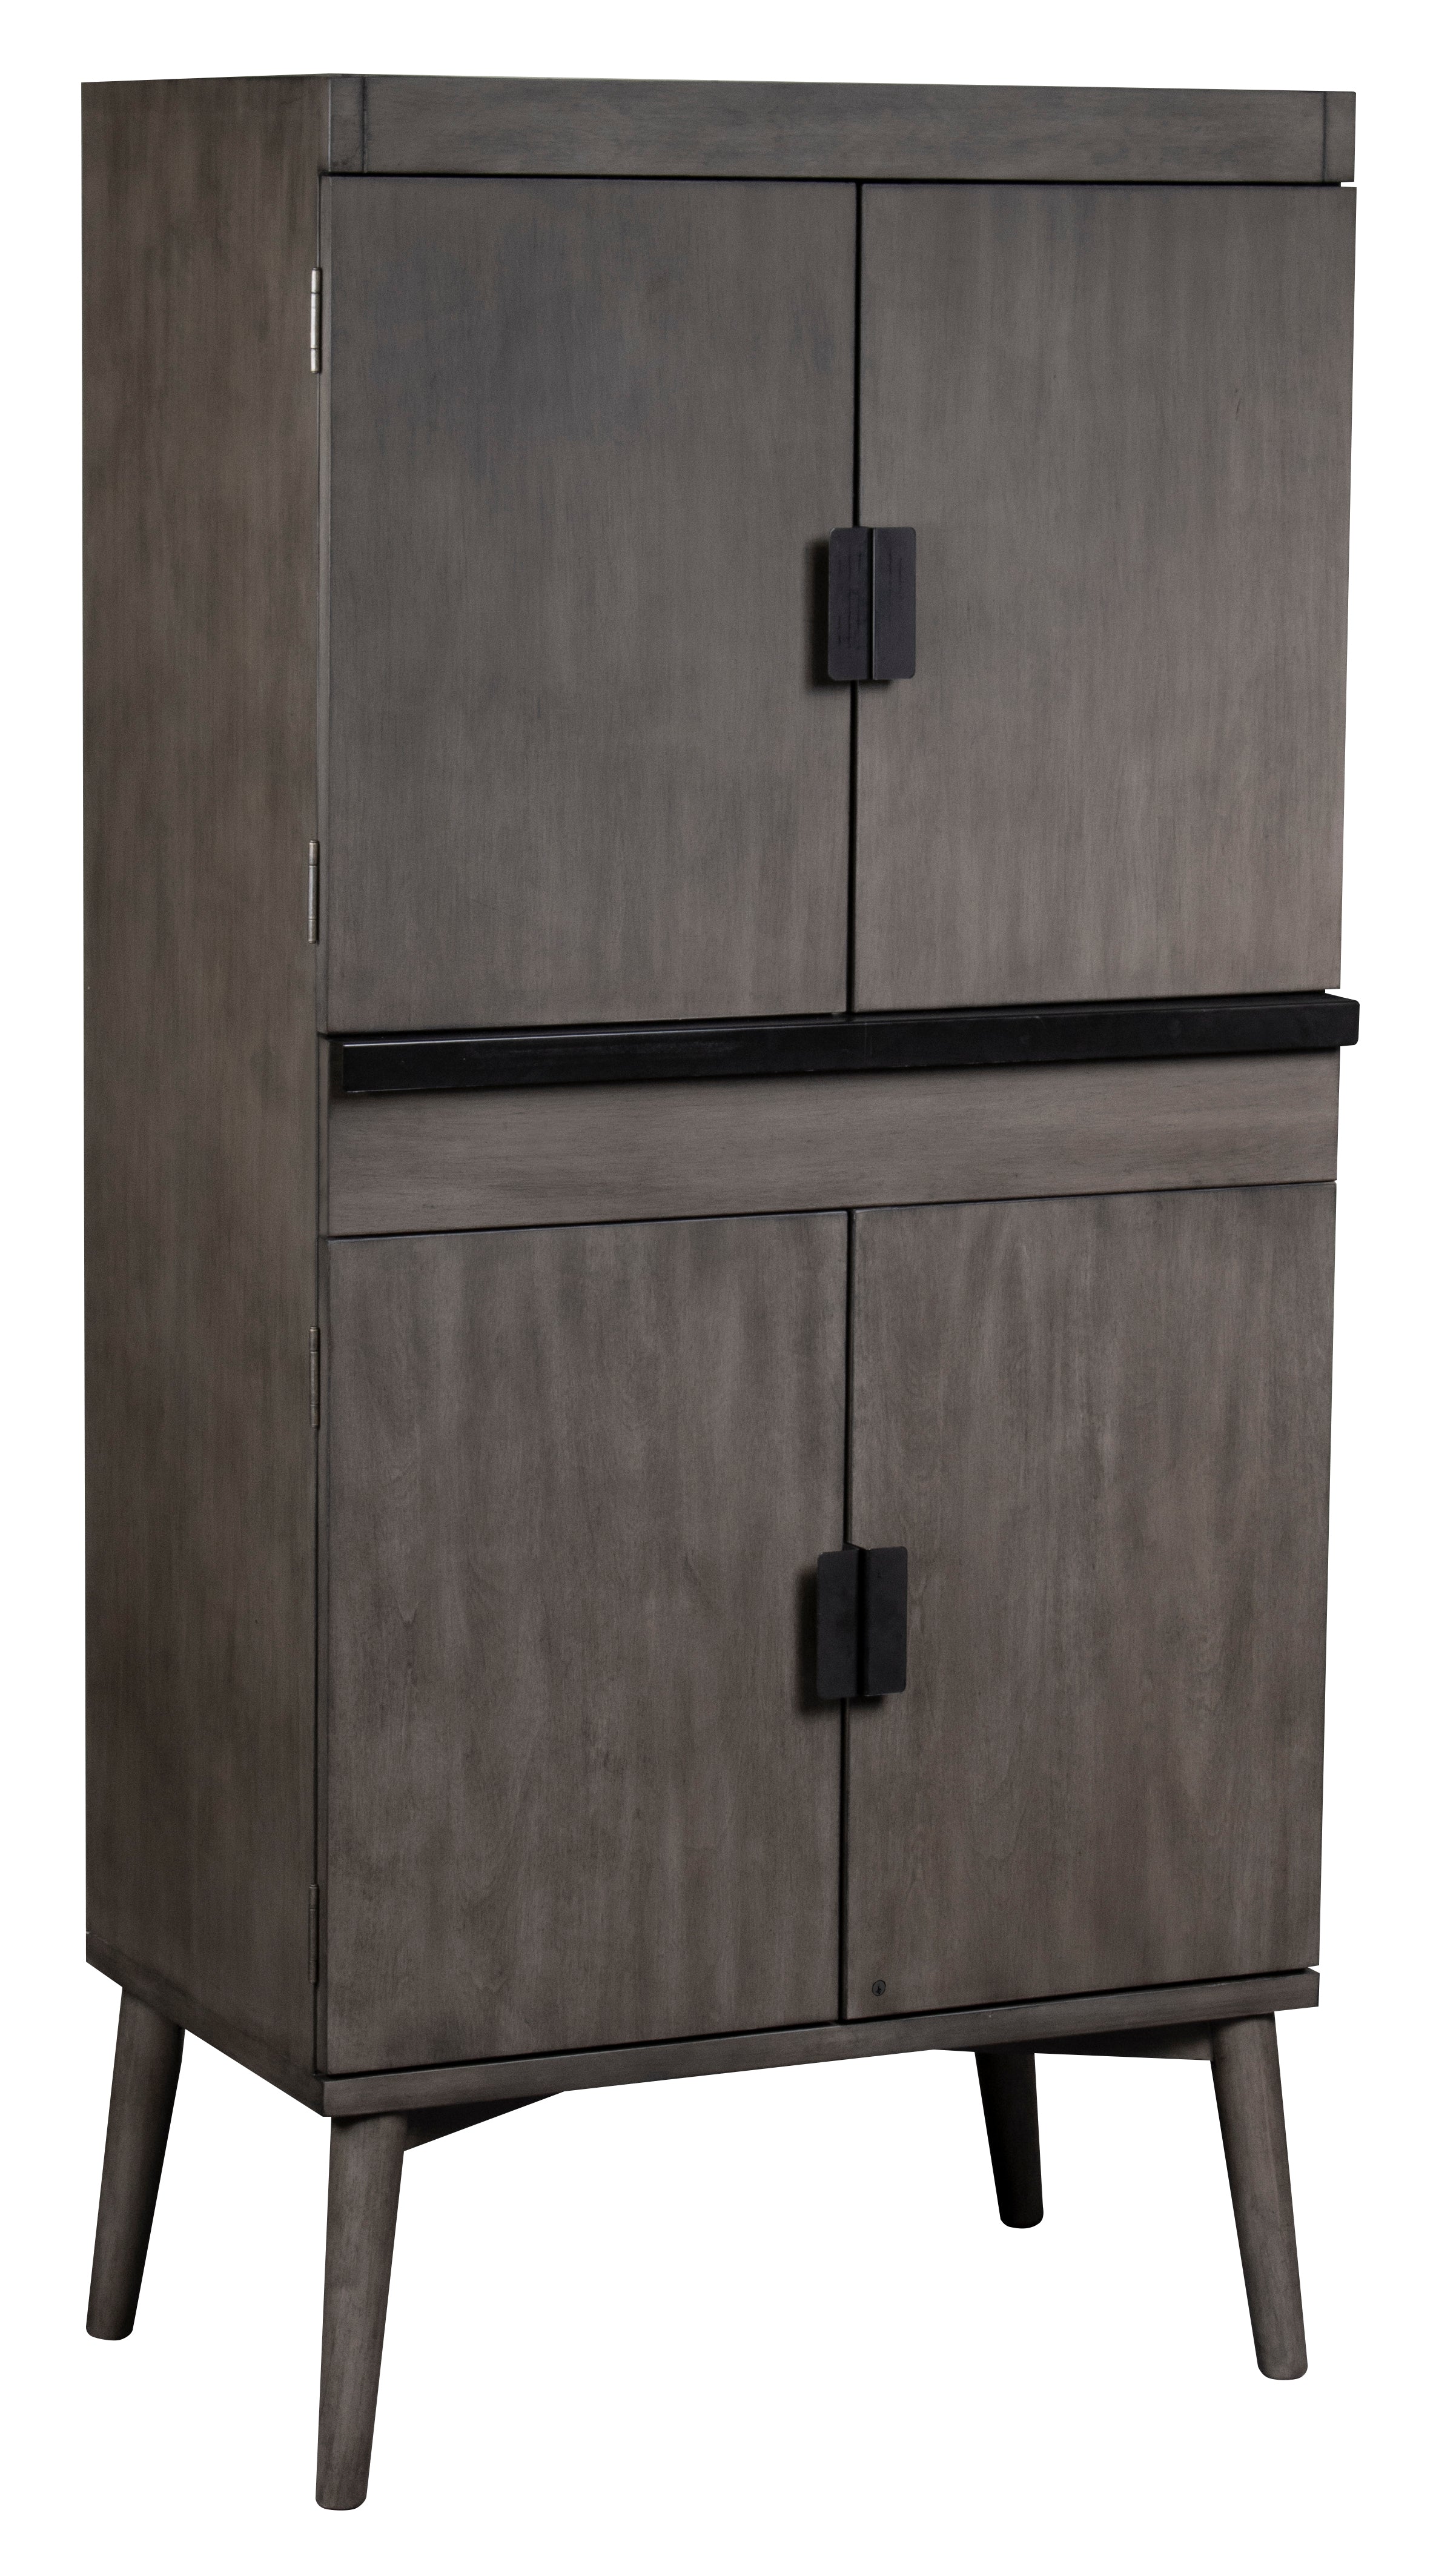 Legacy Billiards Collins Bar Cabinet in Shade Finish - Primary Image